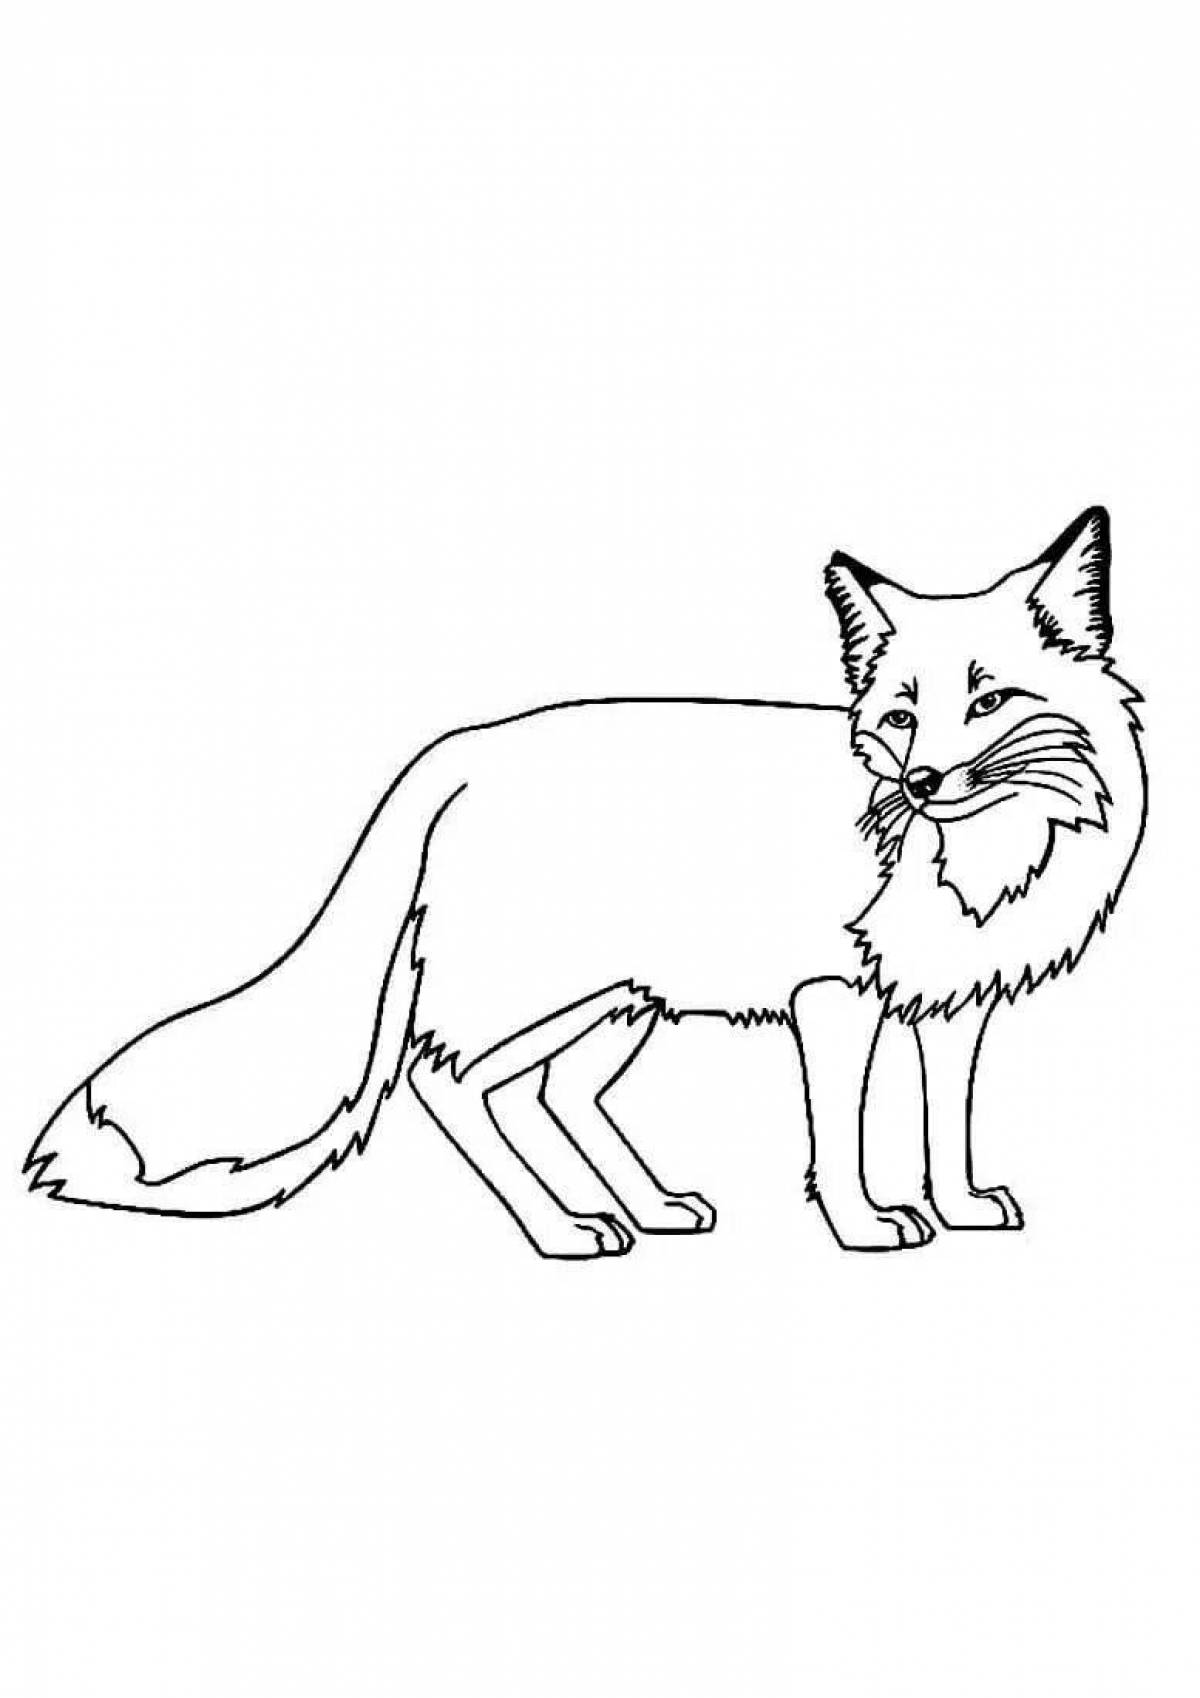 Live sly fox coloring book